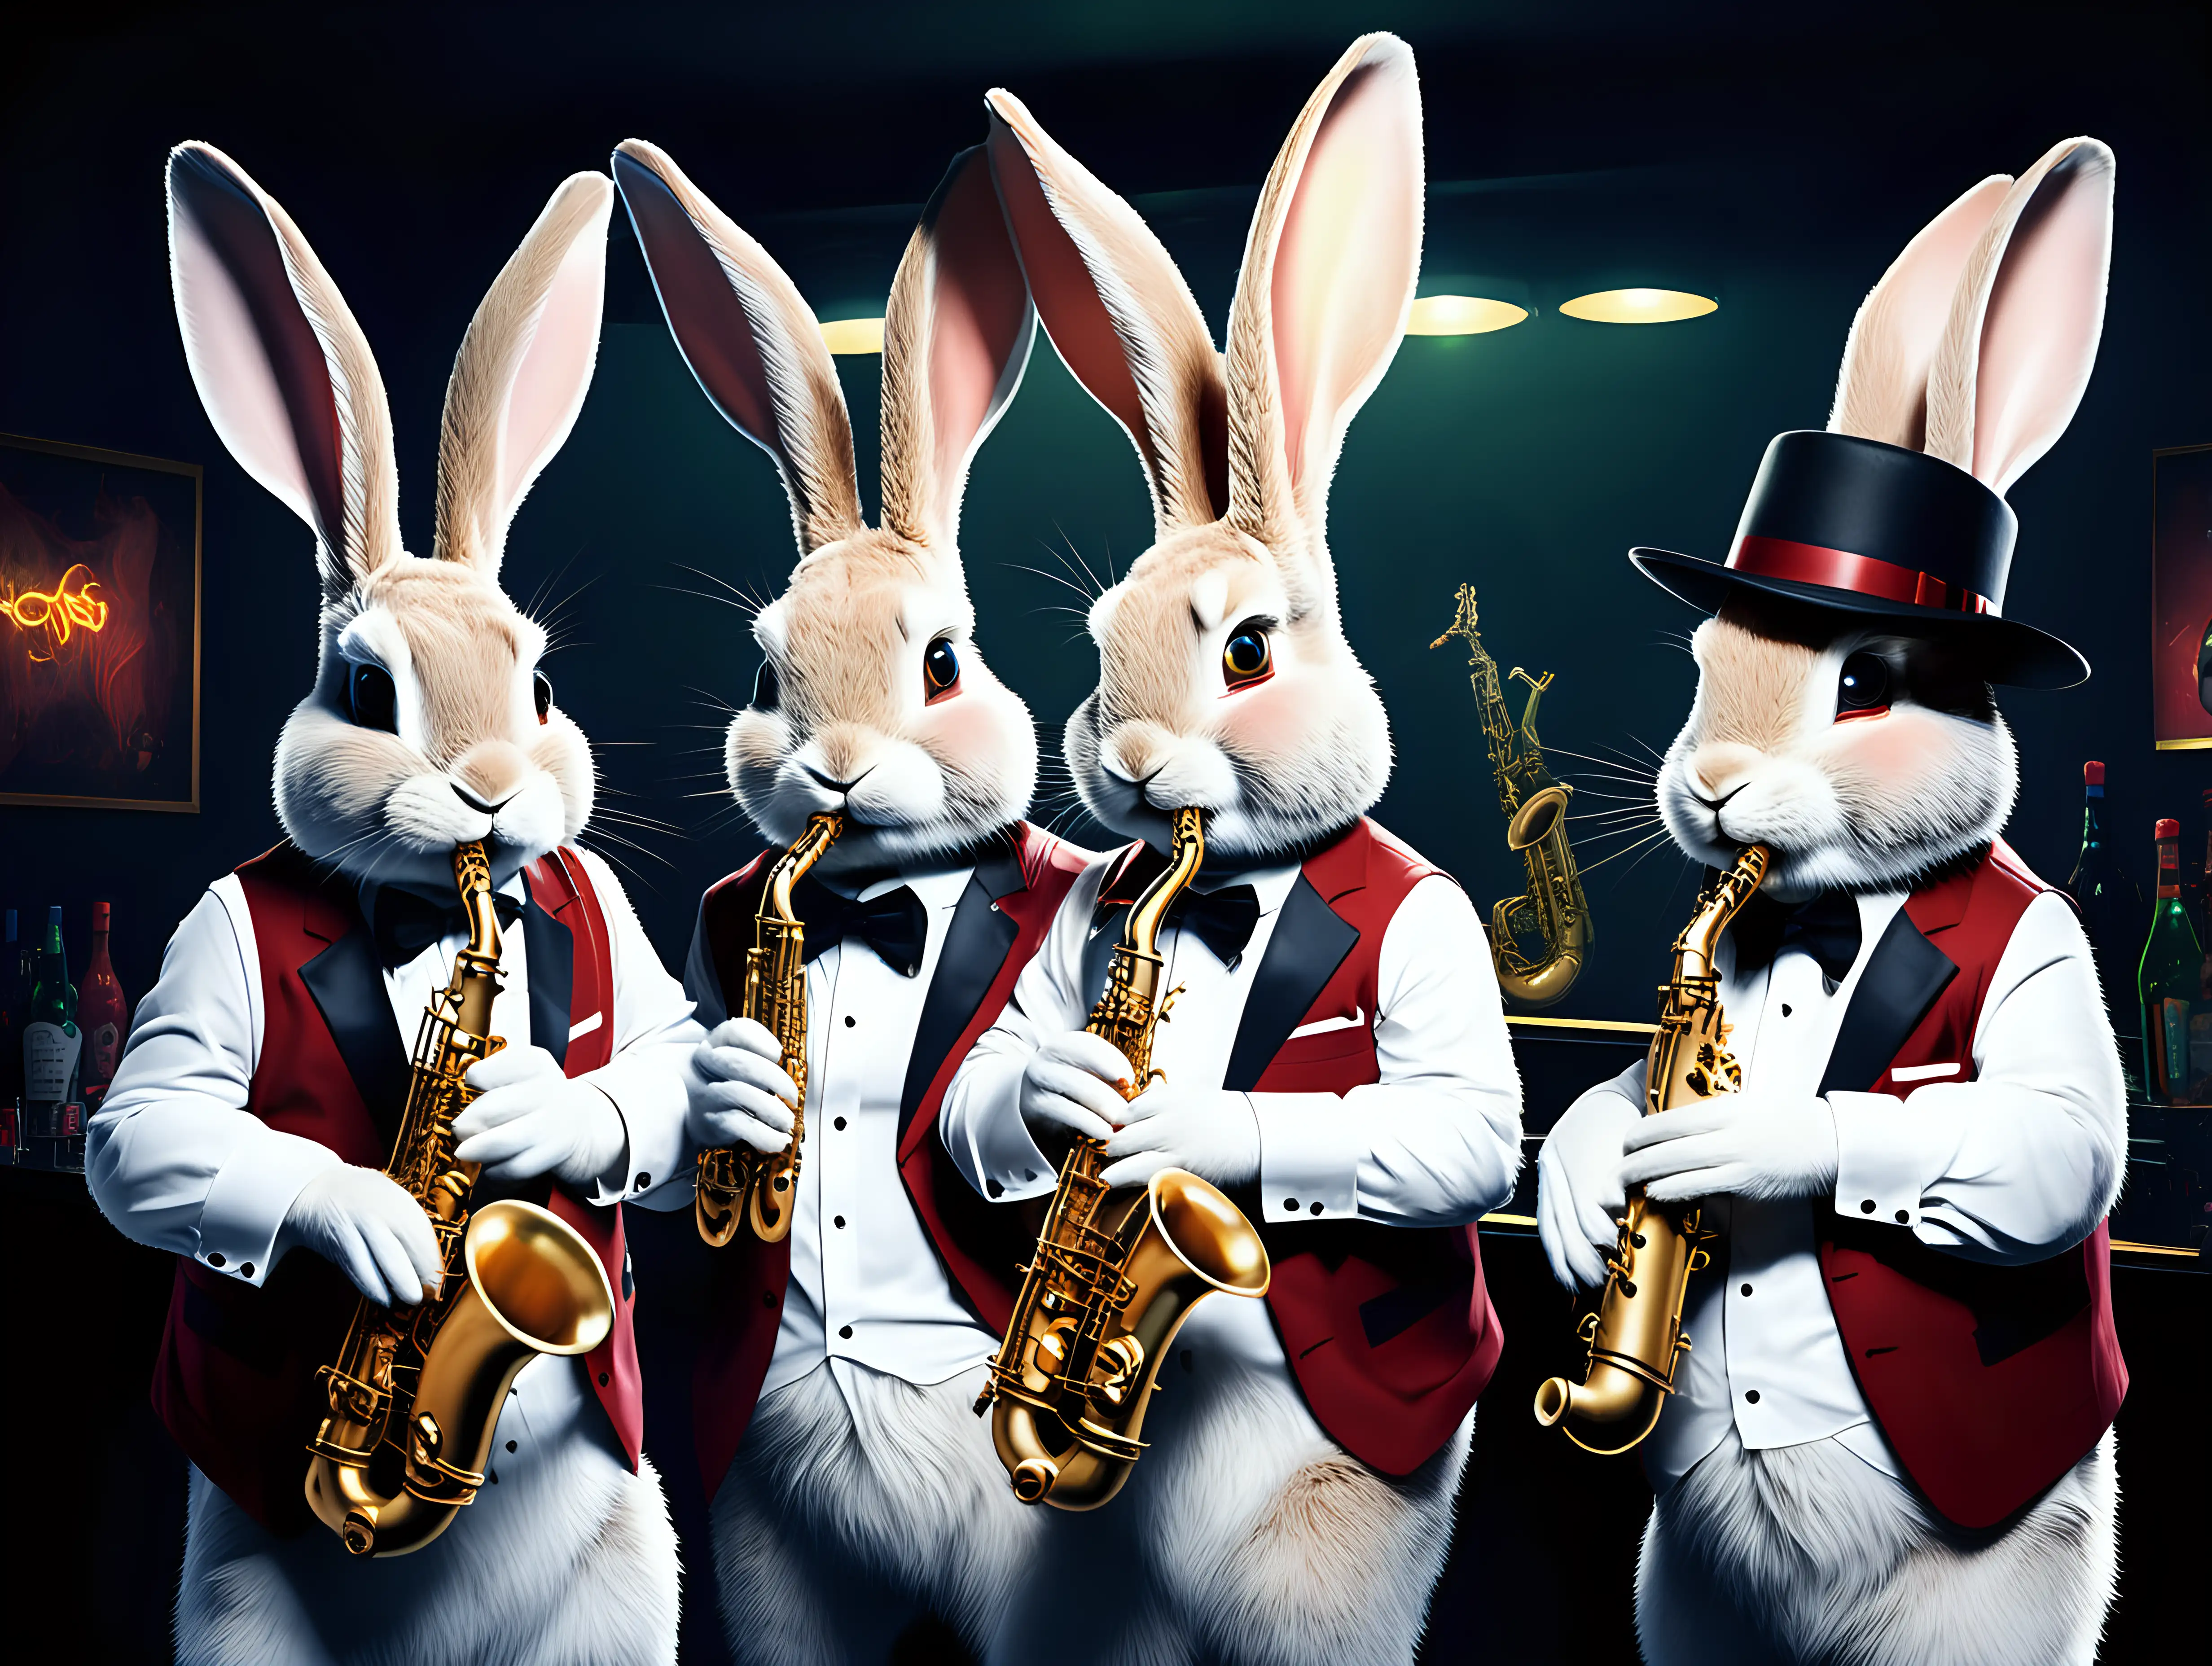 3 rabbits in hats playing saxophones in a night club